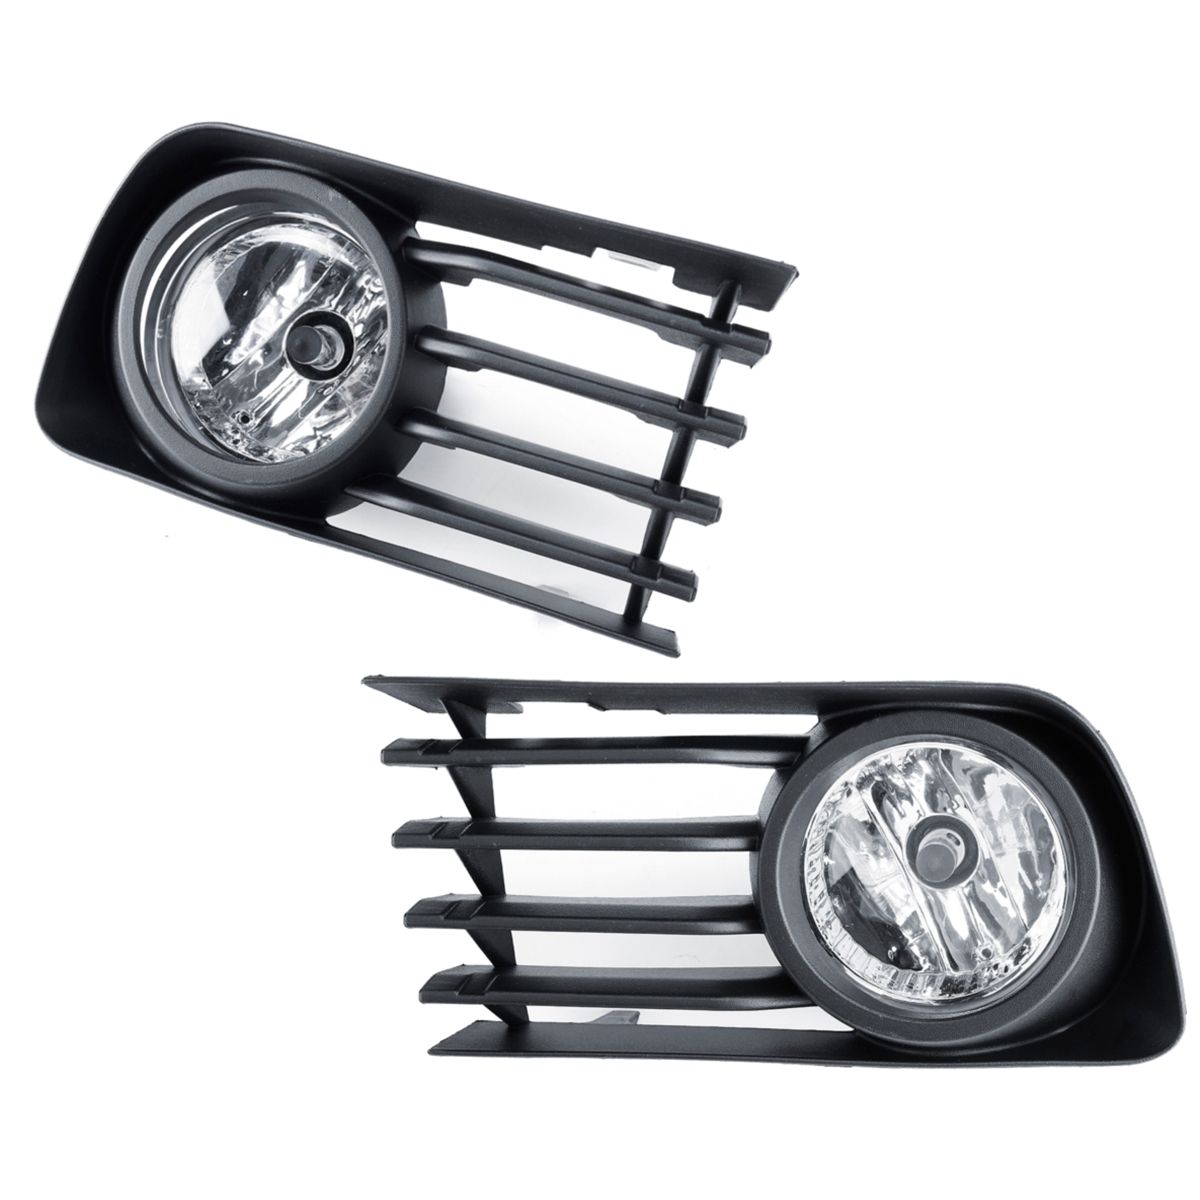 Car-Front-Bumper-Fog-Lights-Lamps-with-Covers-Pair-For-Toyota-Prius-2004-2009-1548750